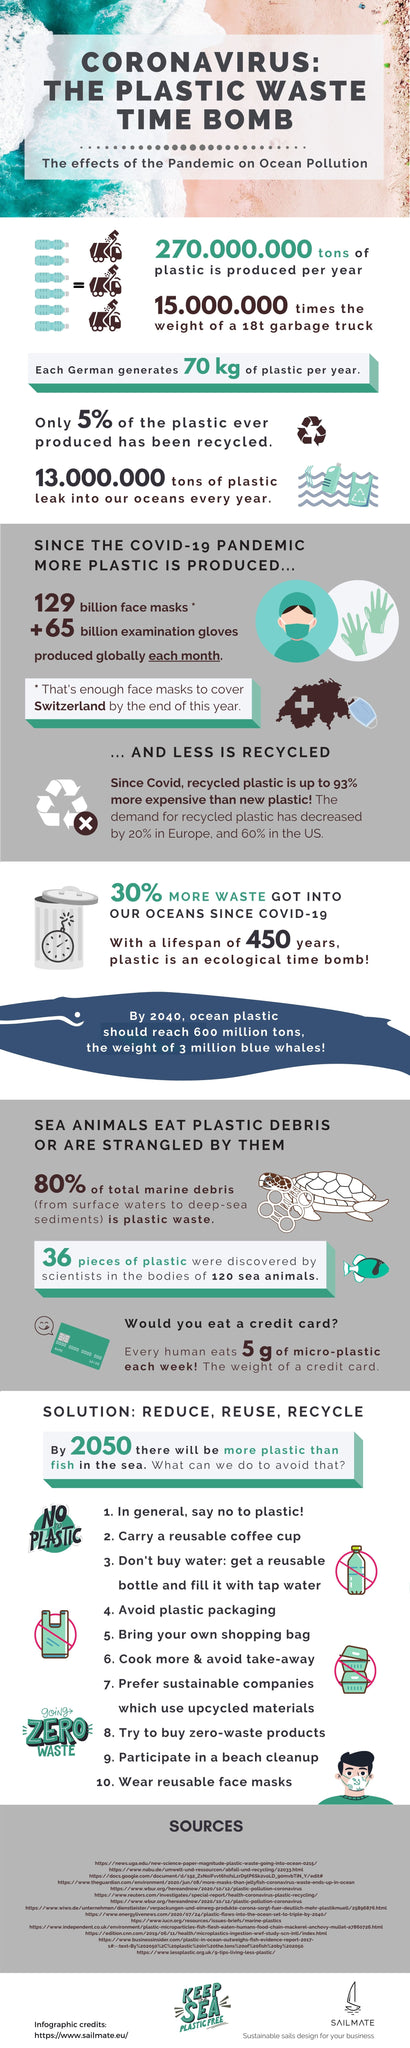 Infographic by Sailmate: Covid19 the plastic waste time bomb